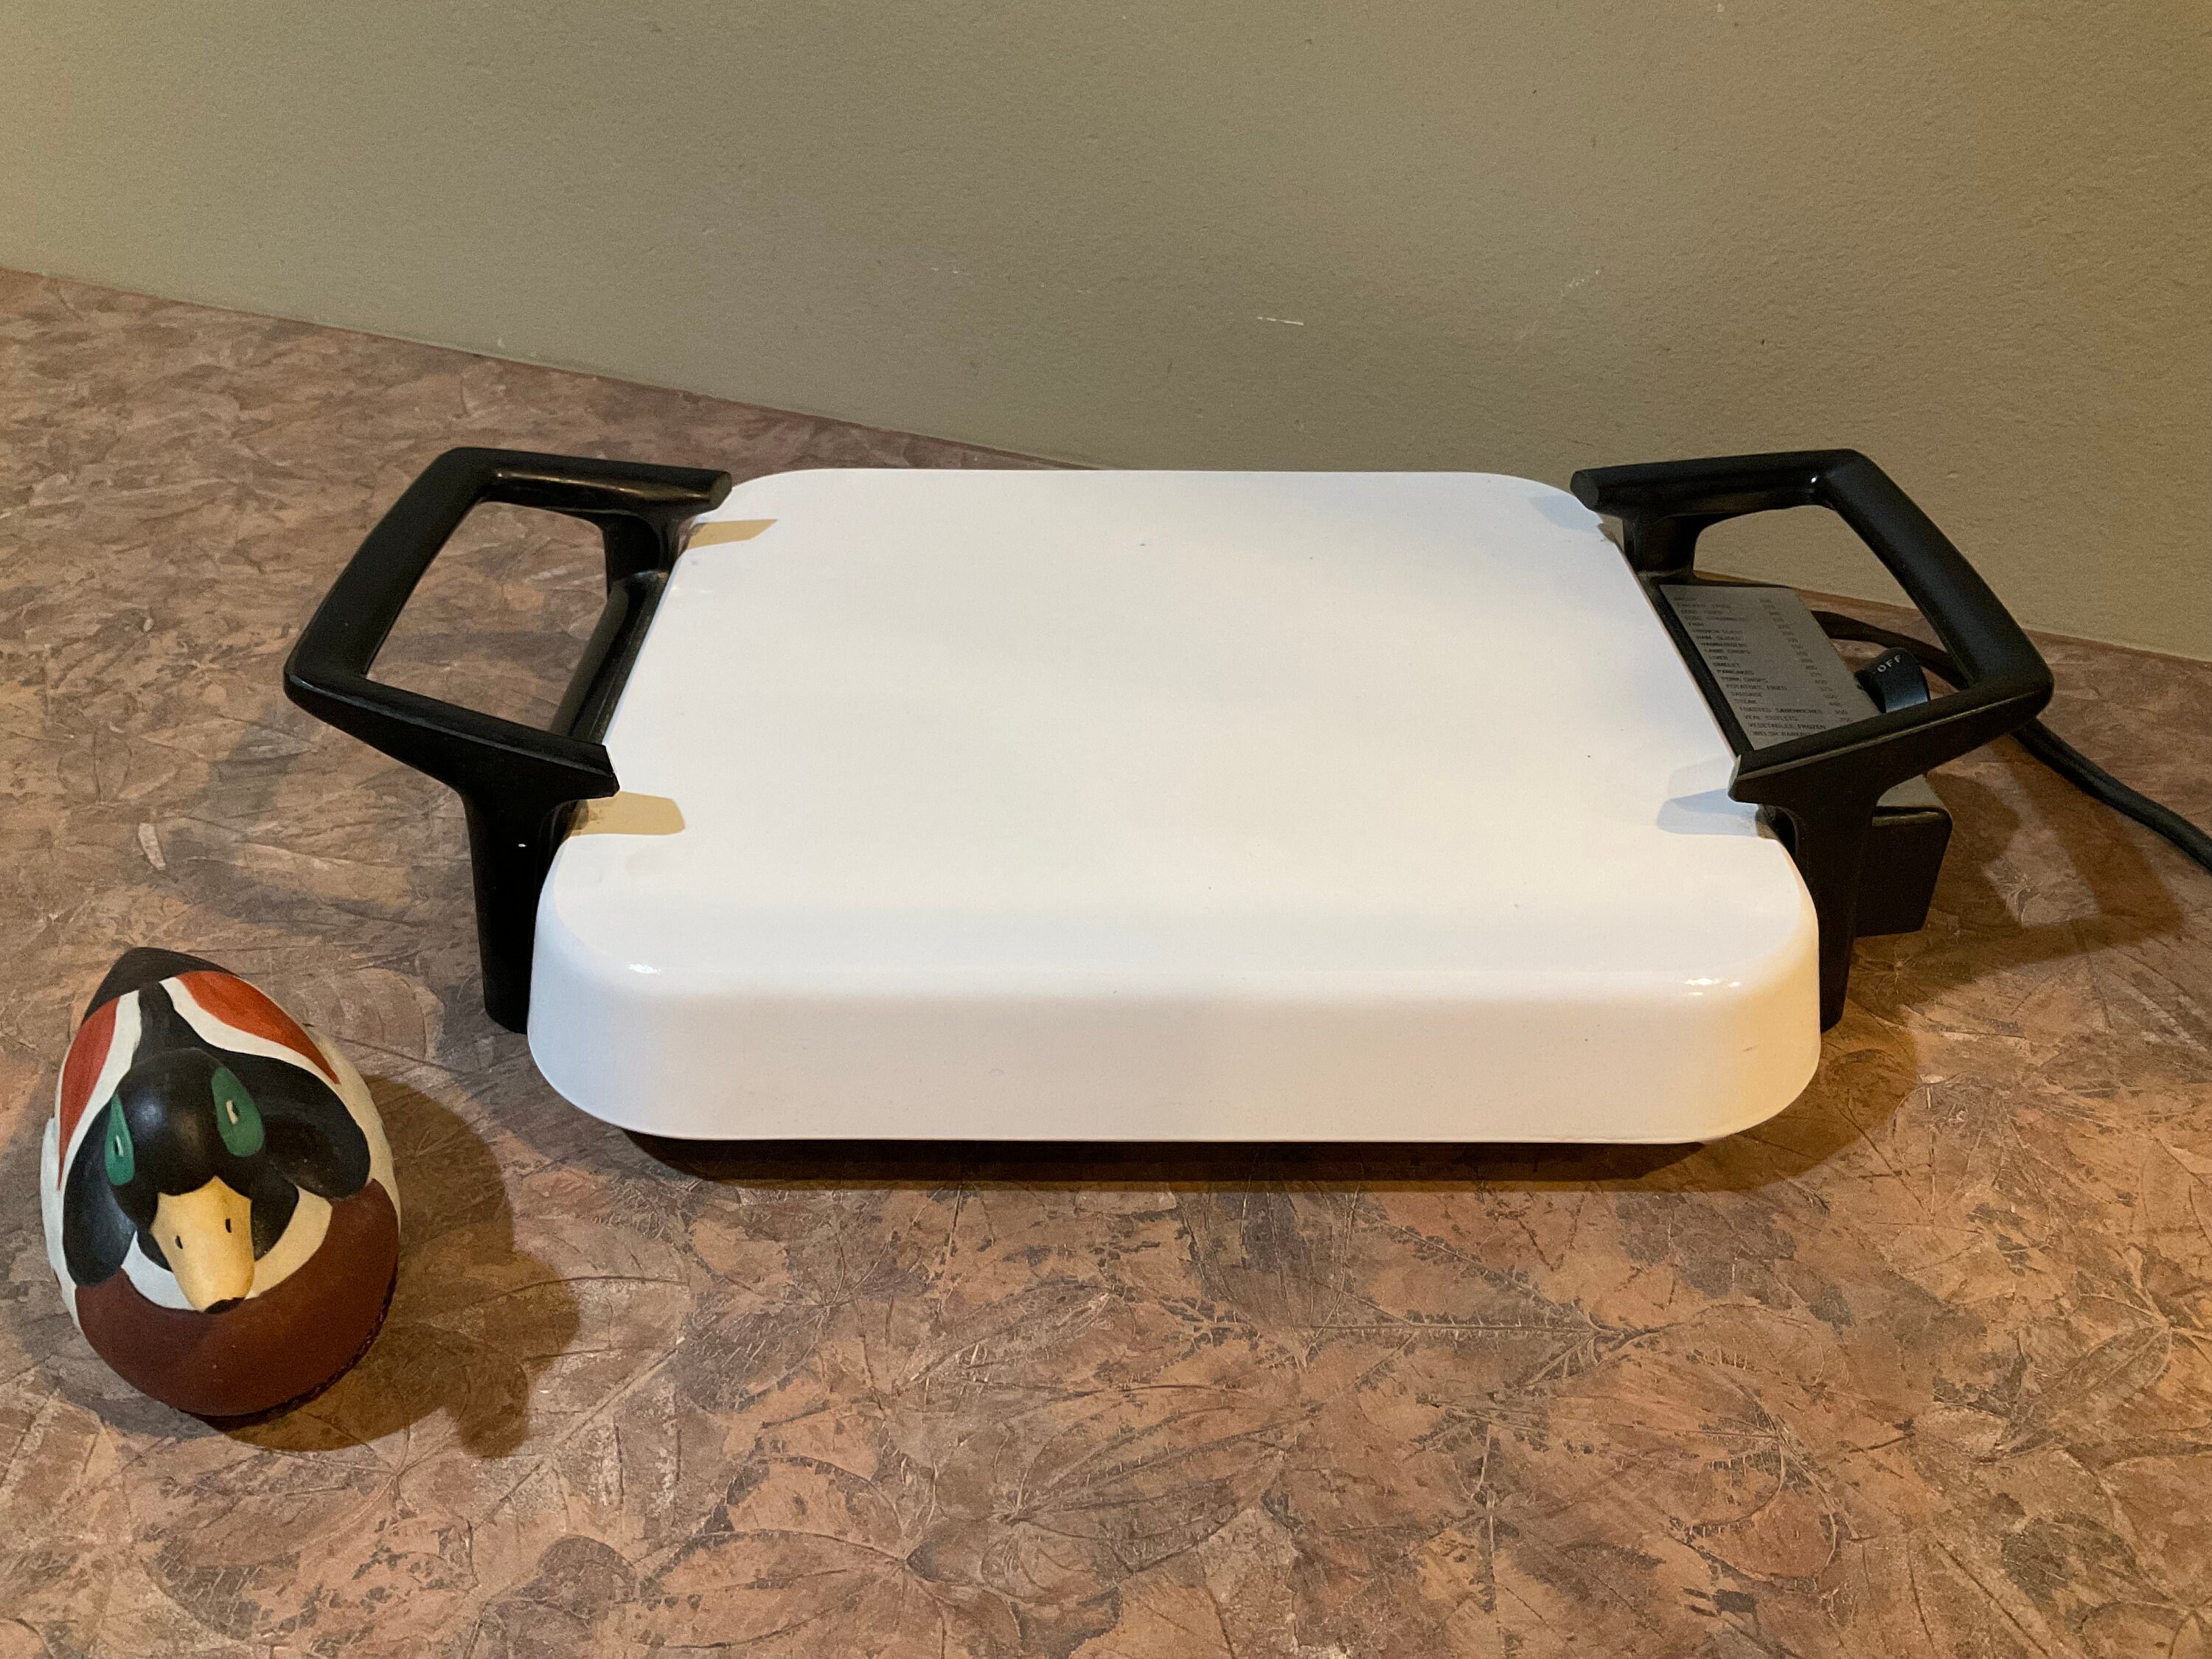 VTG Corning Ware Electromatic Skillet Electric Hot Plate Buffet Warmer &  Dish